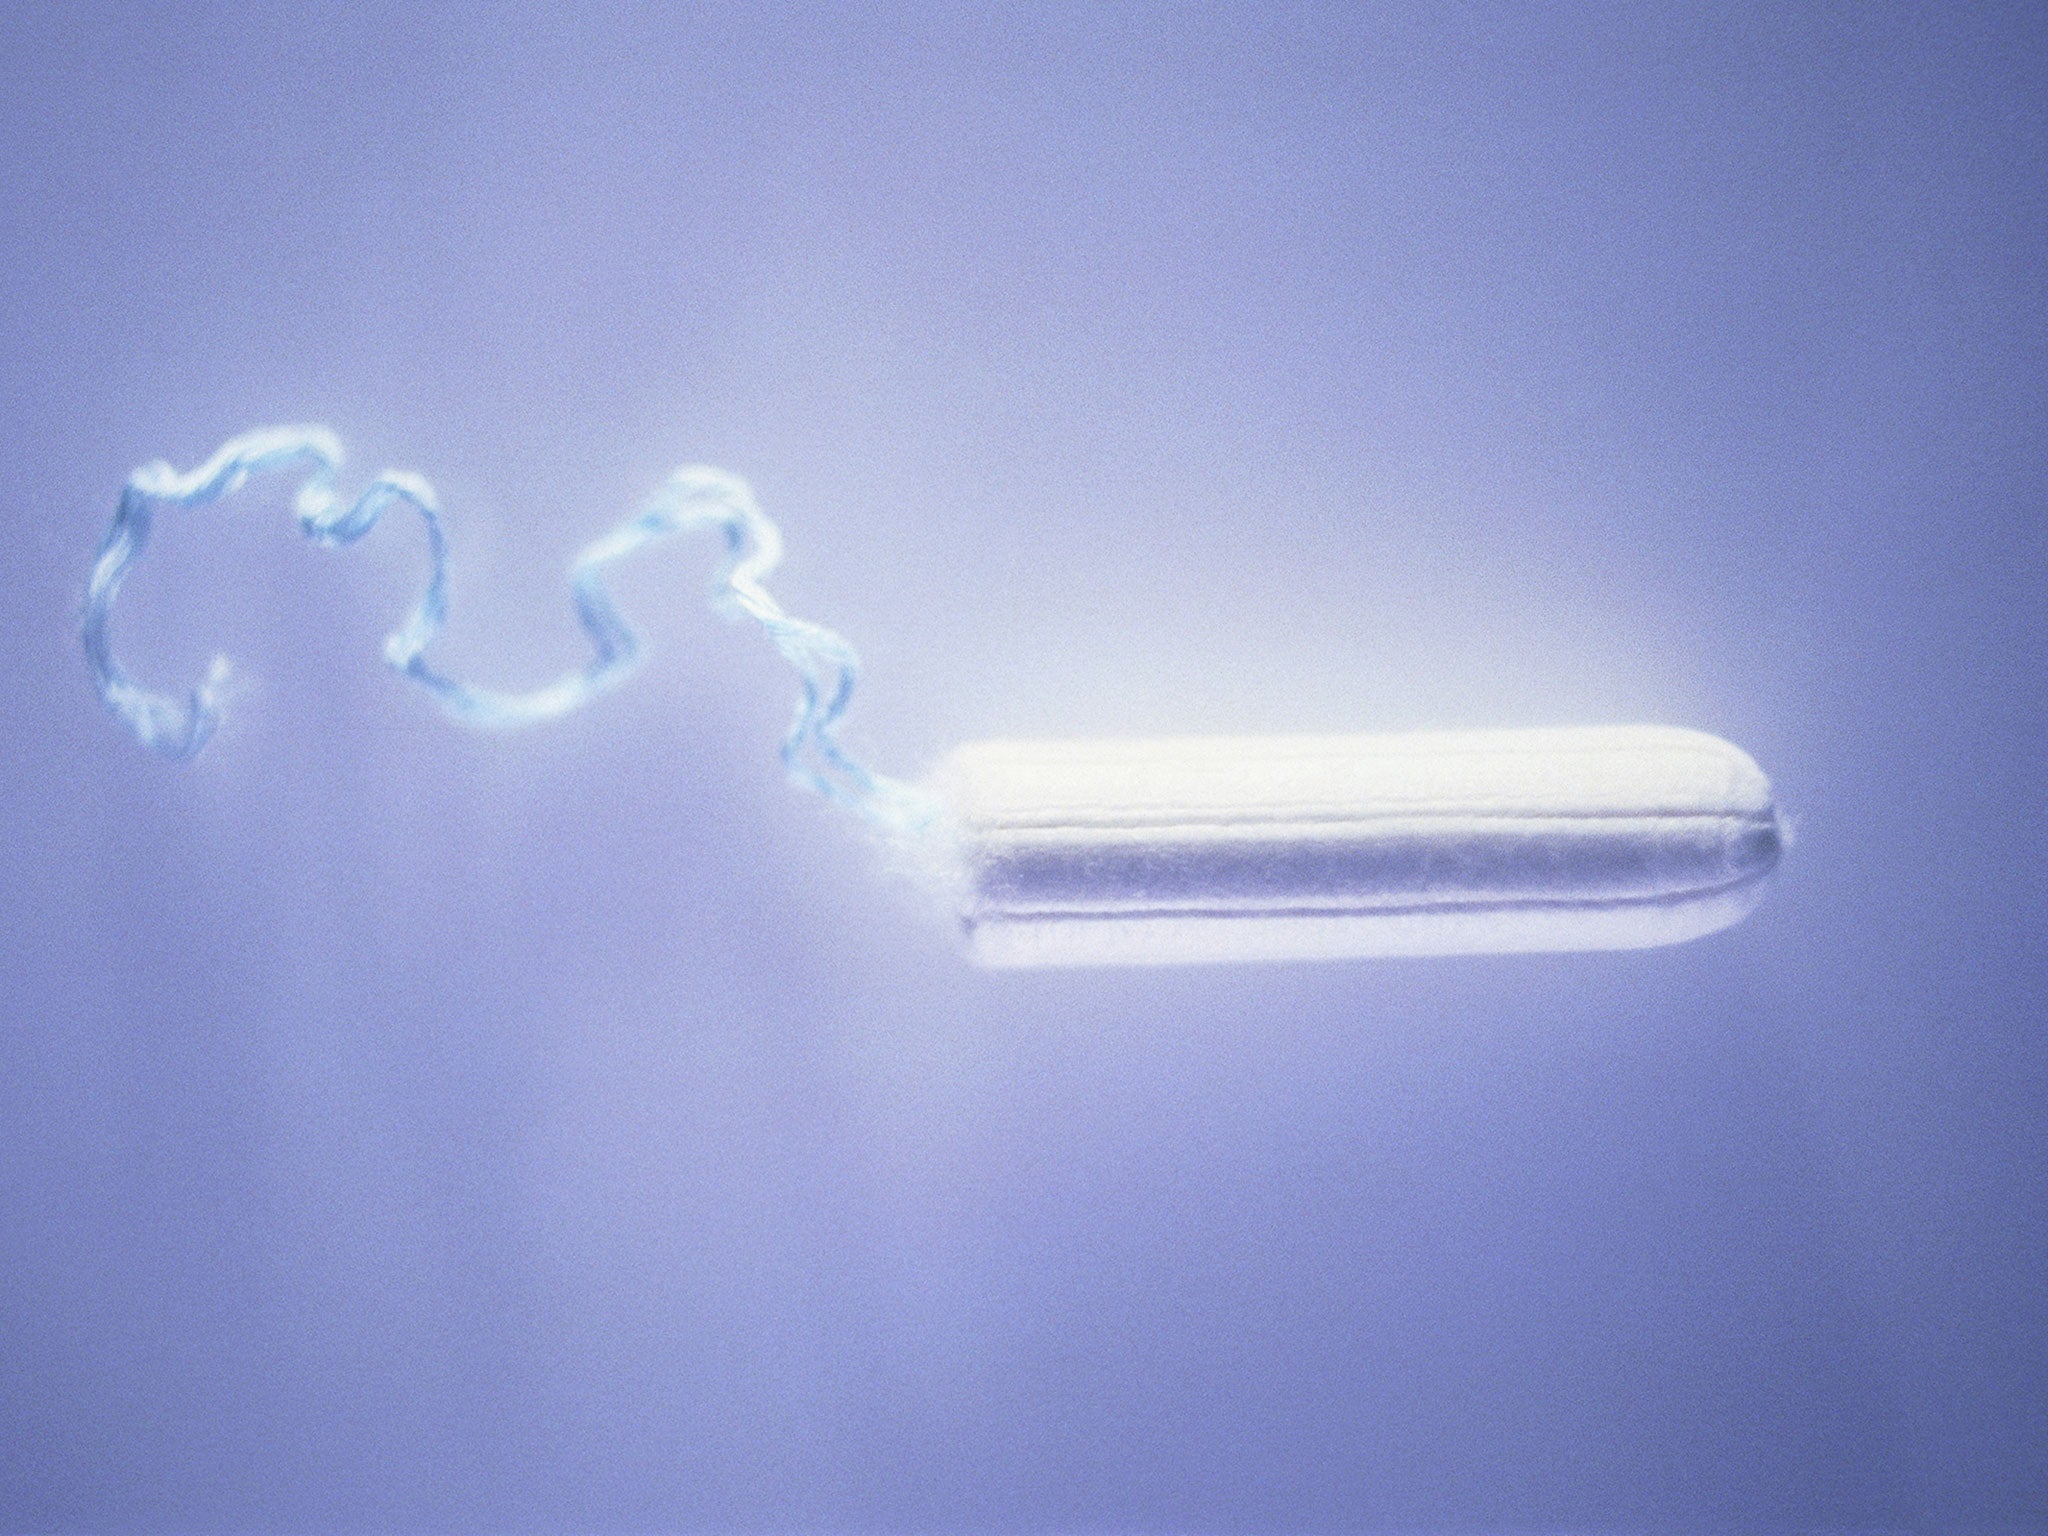 Glow-in-the-dark tampons could help identify water pollution in